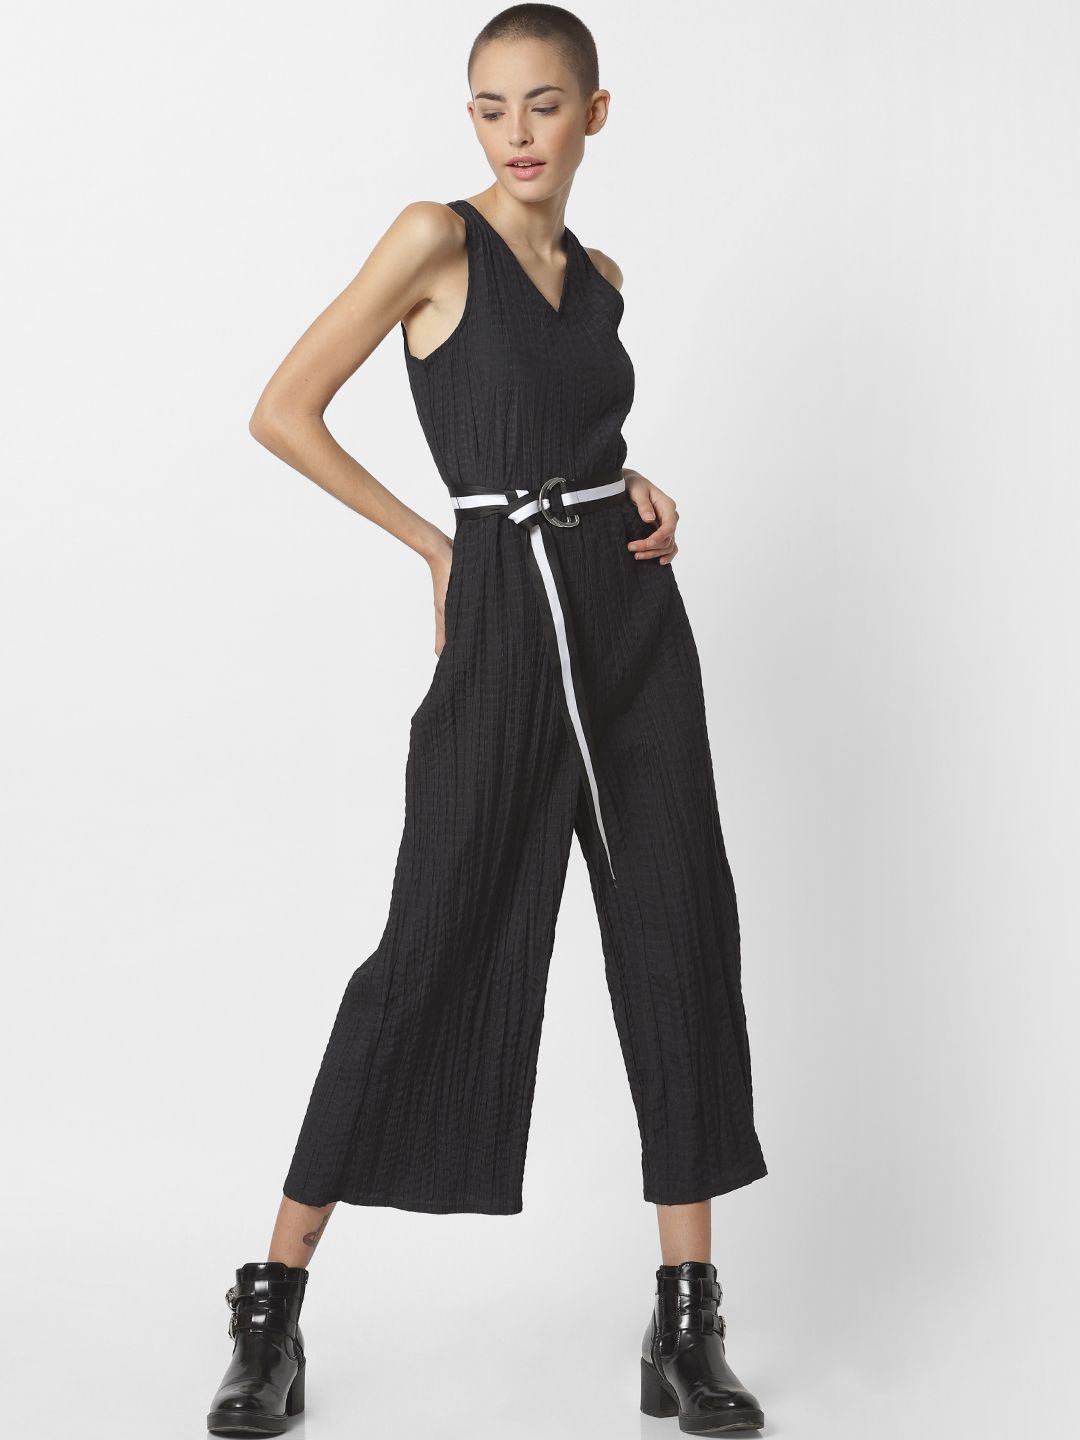 ONLY Women Black Solid Basic Jumpsuit Price in India